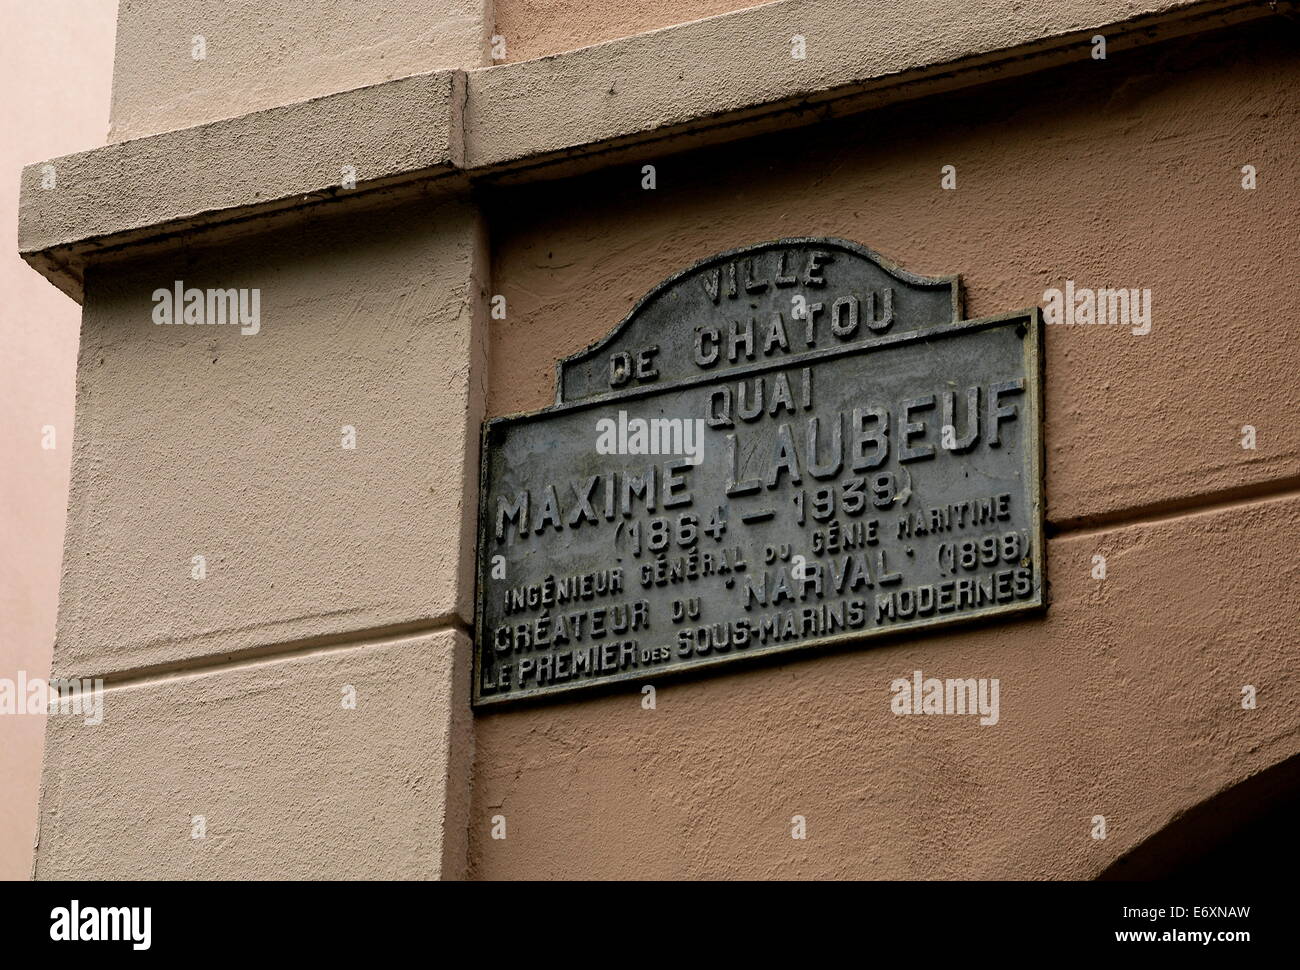 CHATOU, FRANCE - PLAQUE DEDICATED TO MAXIME LAUBEUF (1864-1939) ENGINEER GENERAL OF THE NAVY. PHOTO:JONATHAN EASTLAND/AJAX Stock Photo